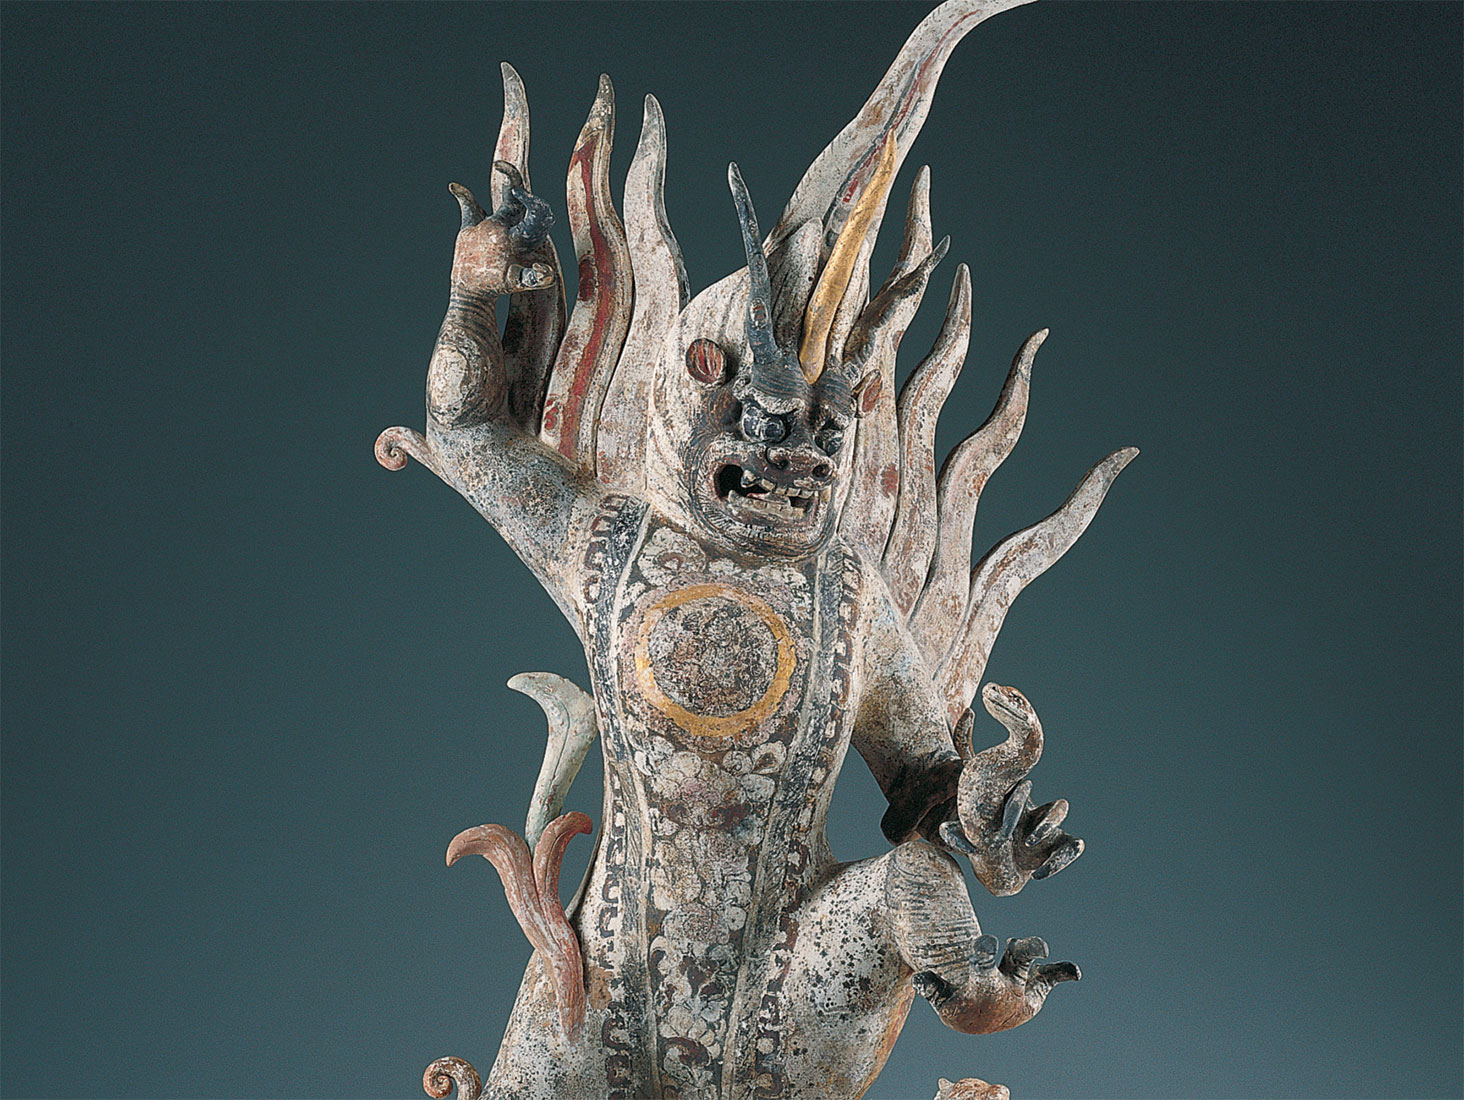 a sculpture of the Earth Spirit from the Tang dynasty in the Kimbell Art Museum’s collection